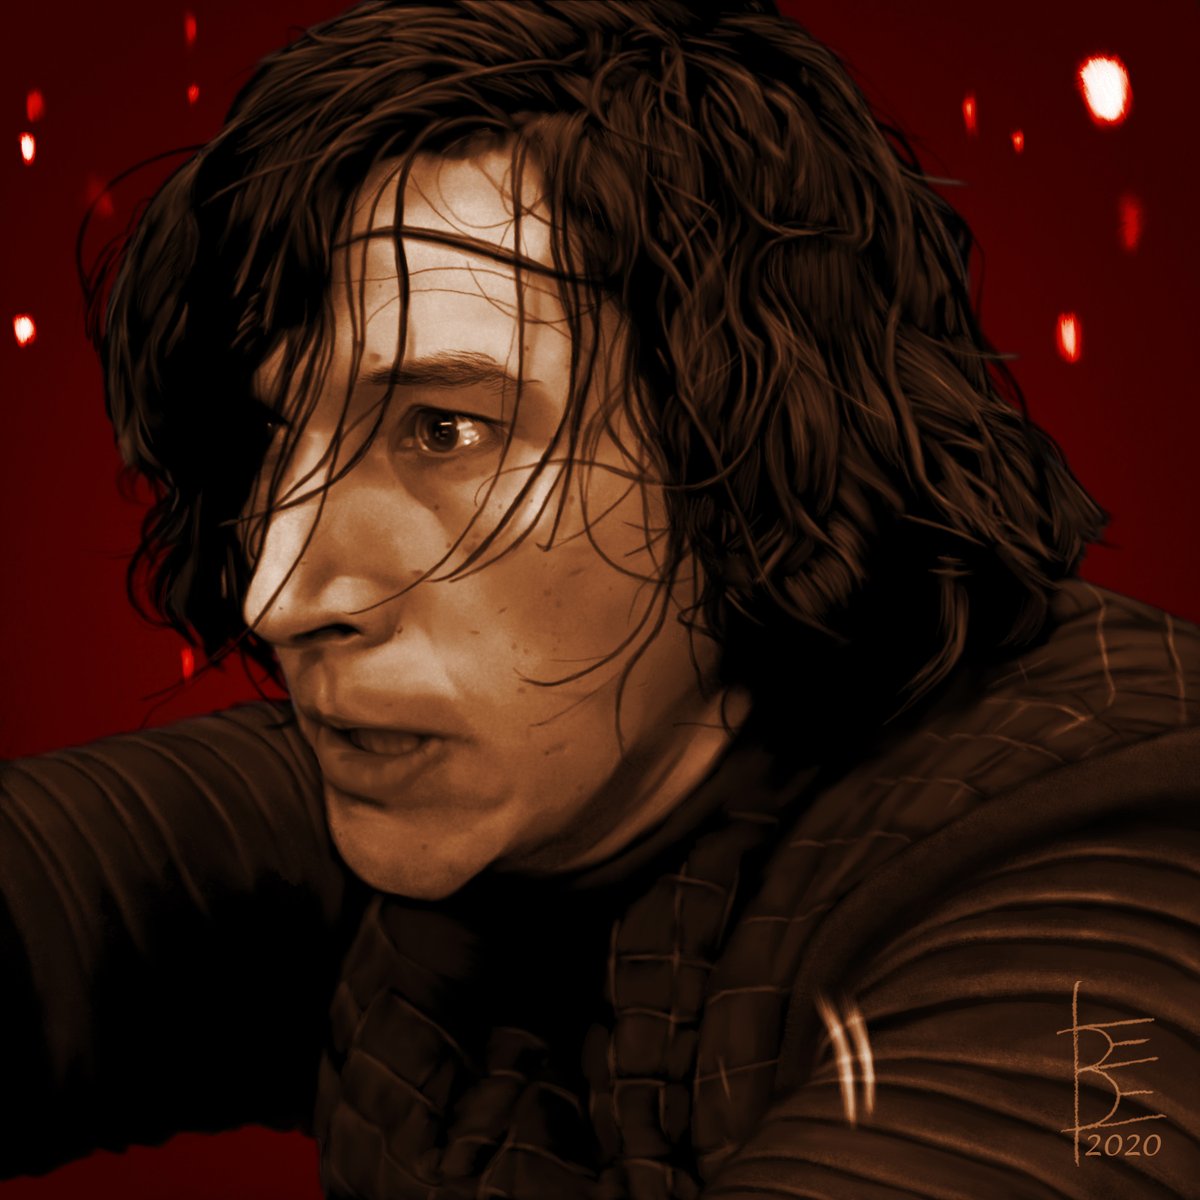 one half of our feral dyad
'Kylo Ren #2'
#RevengeOfThe5th 
3/x